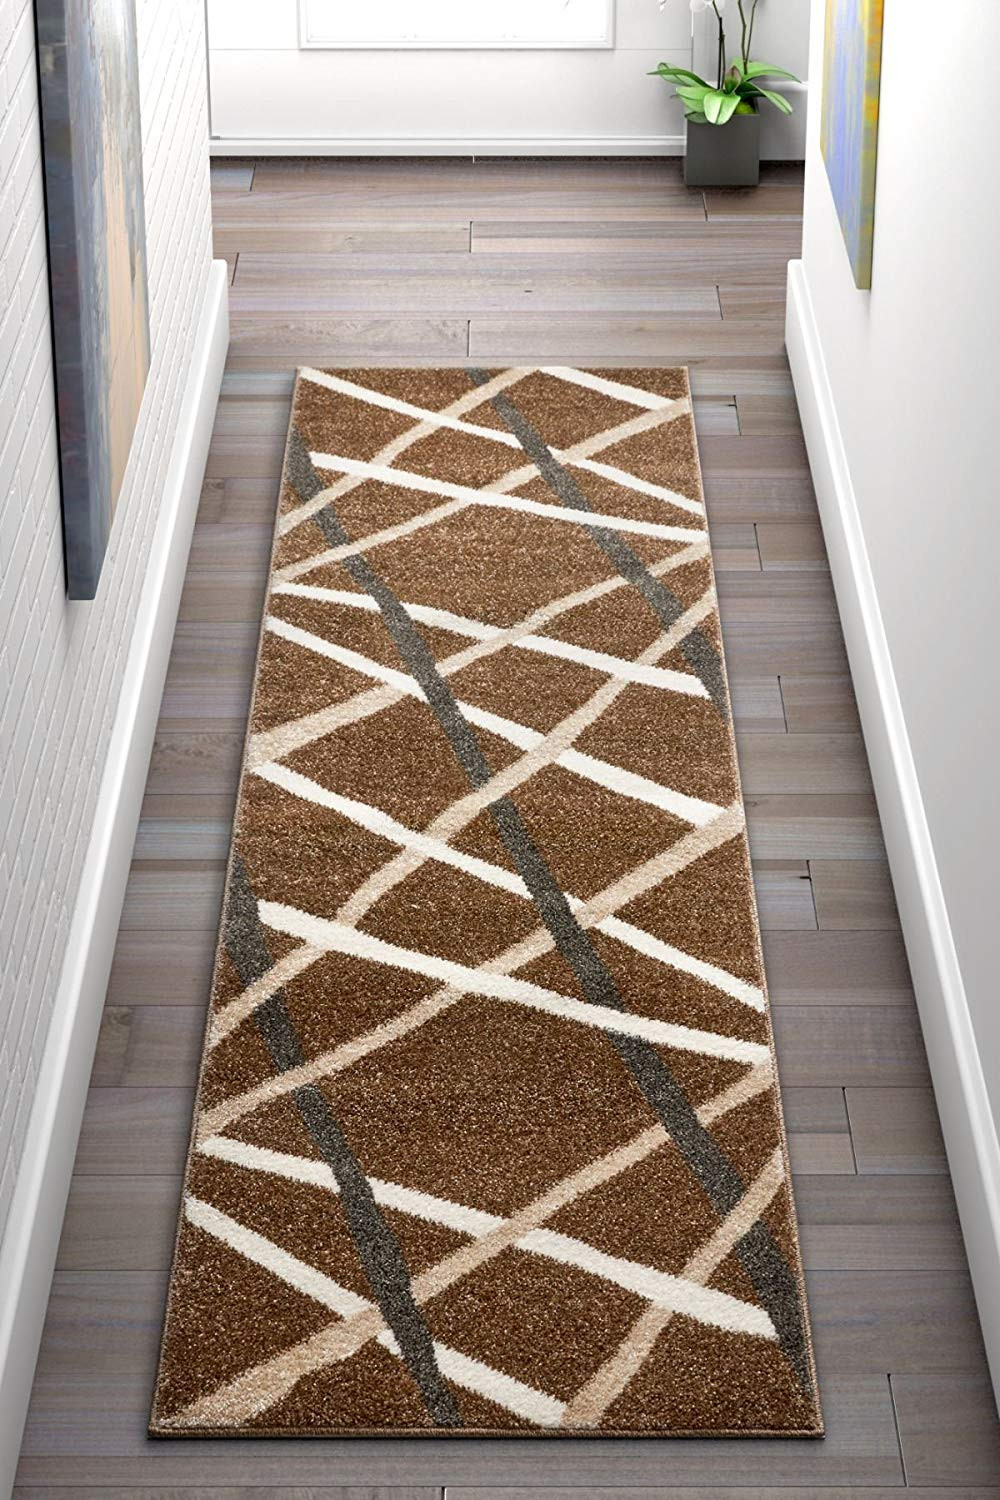 26 Perfect Superior Hardwood Flooring Rockwood Ontario 2022 free download superior hardwood flooring rockwood ontario of amazon com well woven traverse stripes brown geometric modern lines in amazon com well woven traverse stripes brown geometric modern lines area